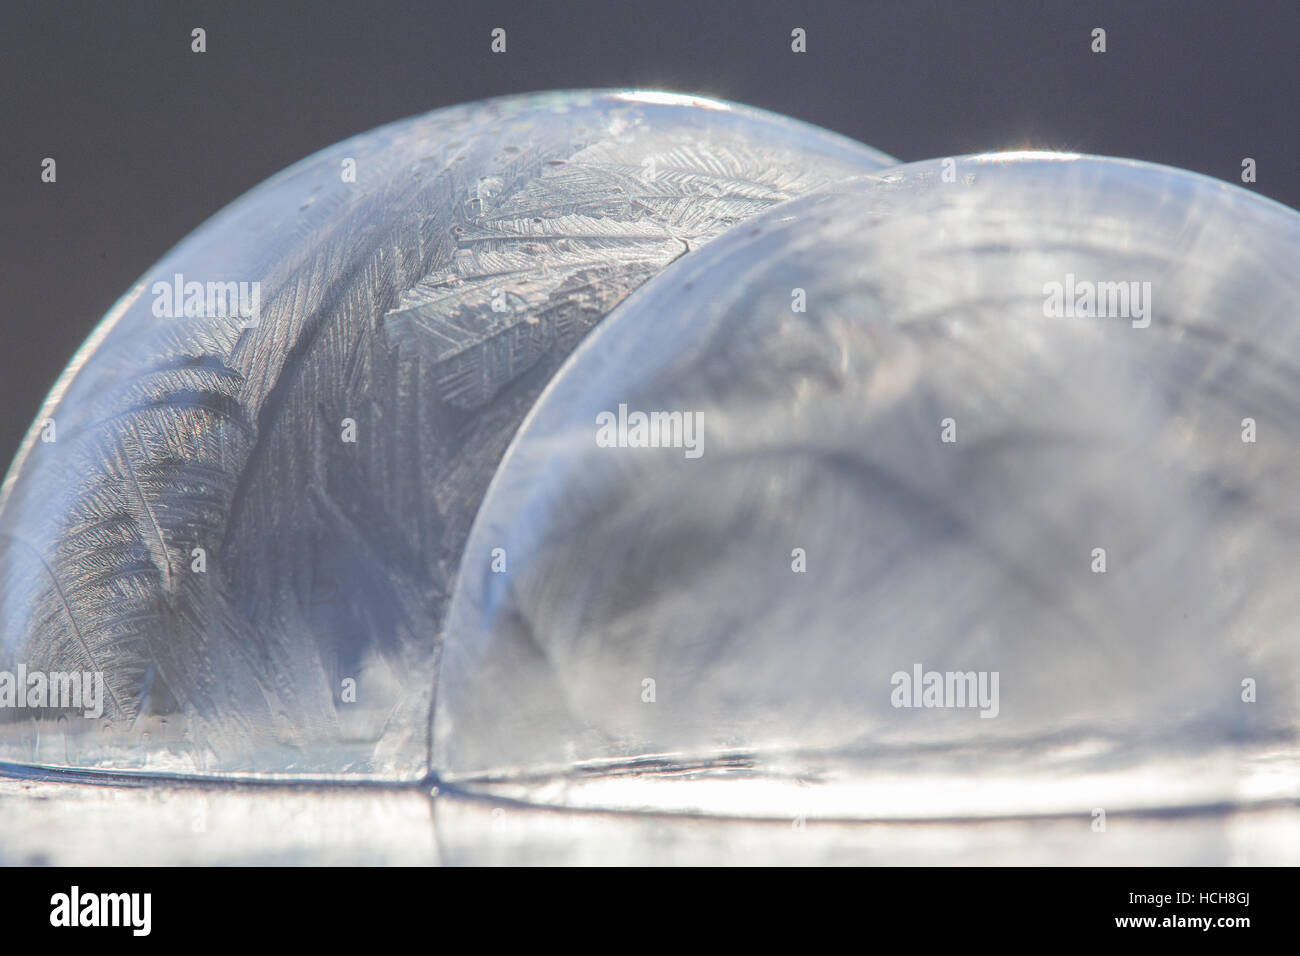 Two icy, frozen soap bubble domes connected in the middle in bright light Stock Photo